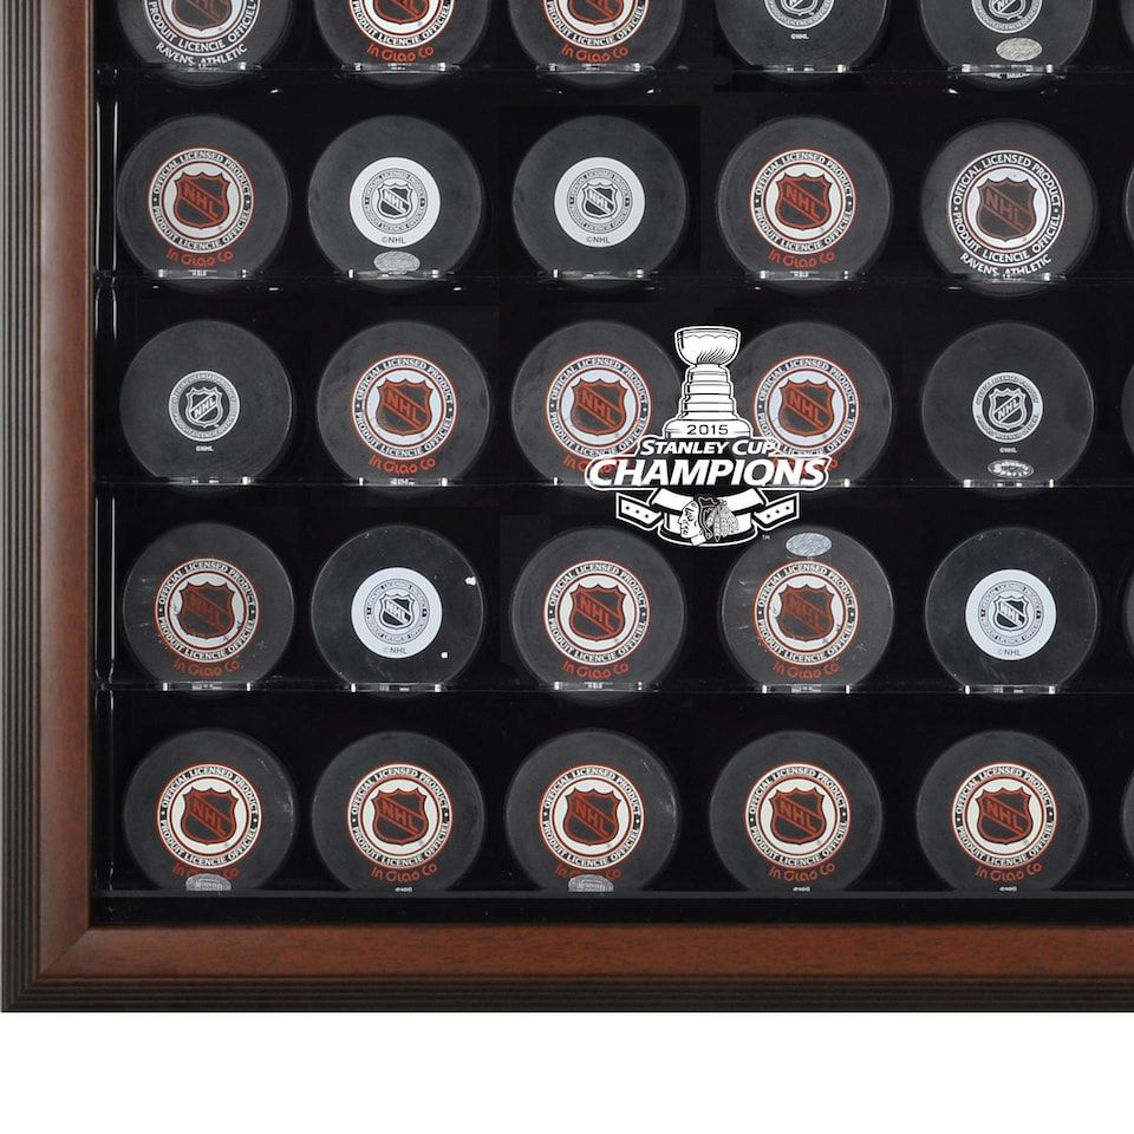 Fanatics Authentic Chicago Blackhawks 2015 Stanley Cup s Brown Framed 30-Puck Logo Display Case - Image 2 of 2